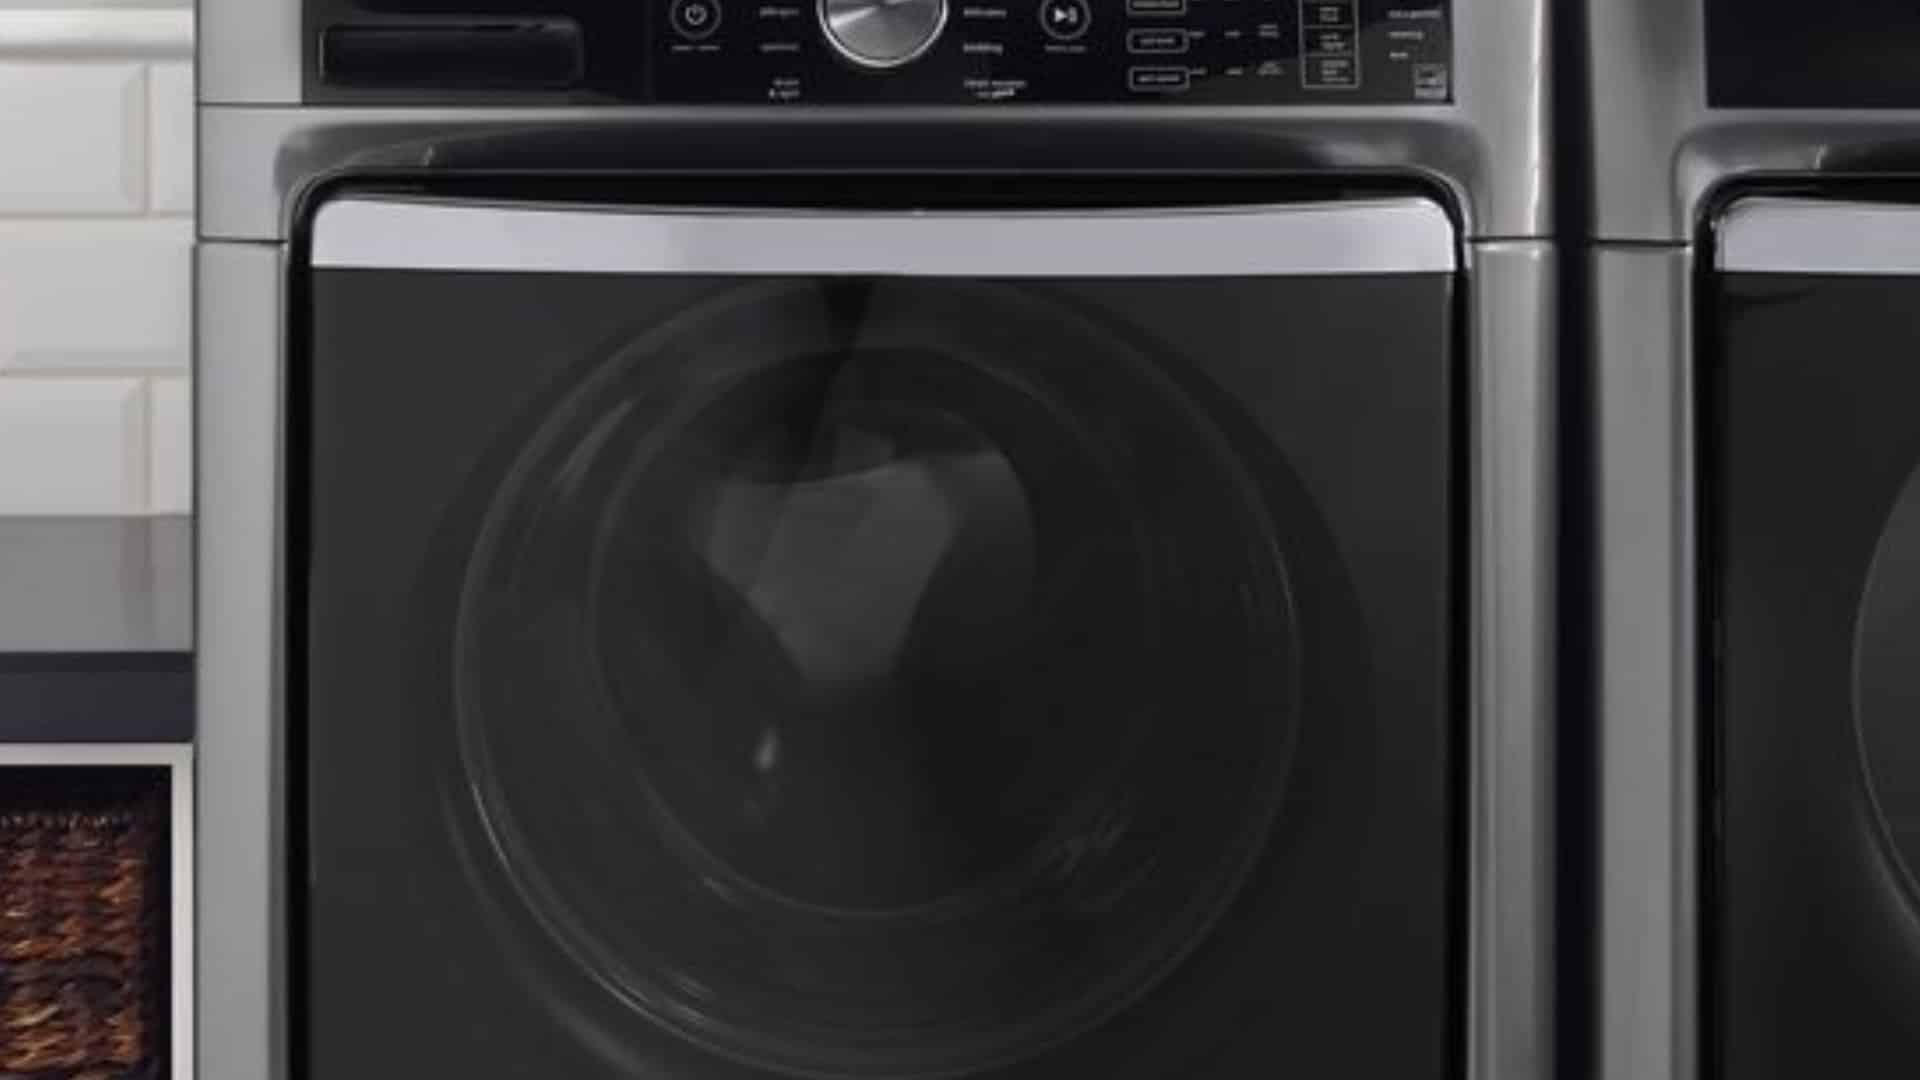 Featured image for “Maytag Washer Not Spinning? 5 Simple Solutions”